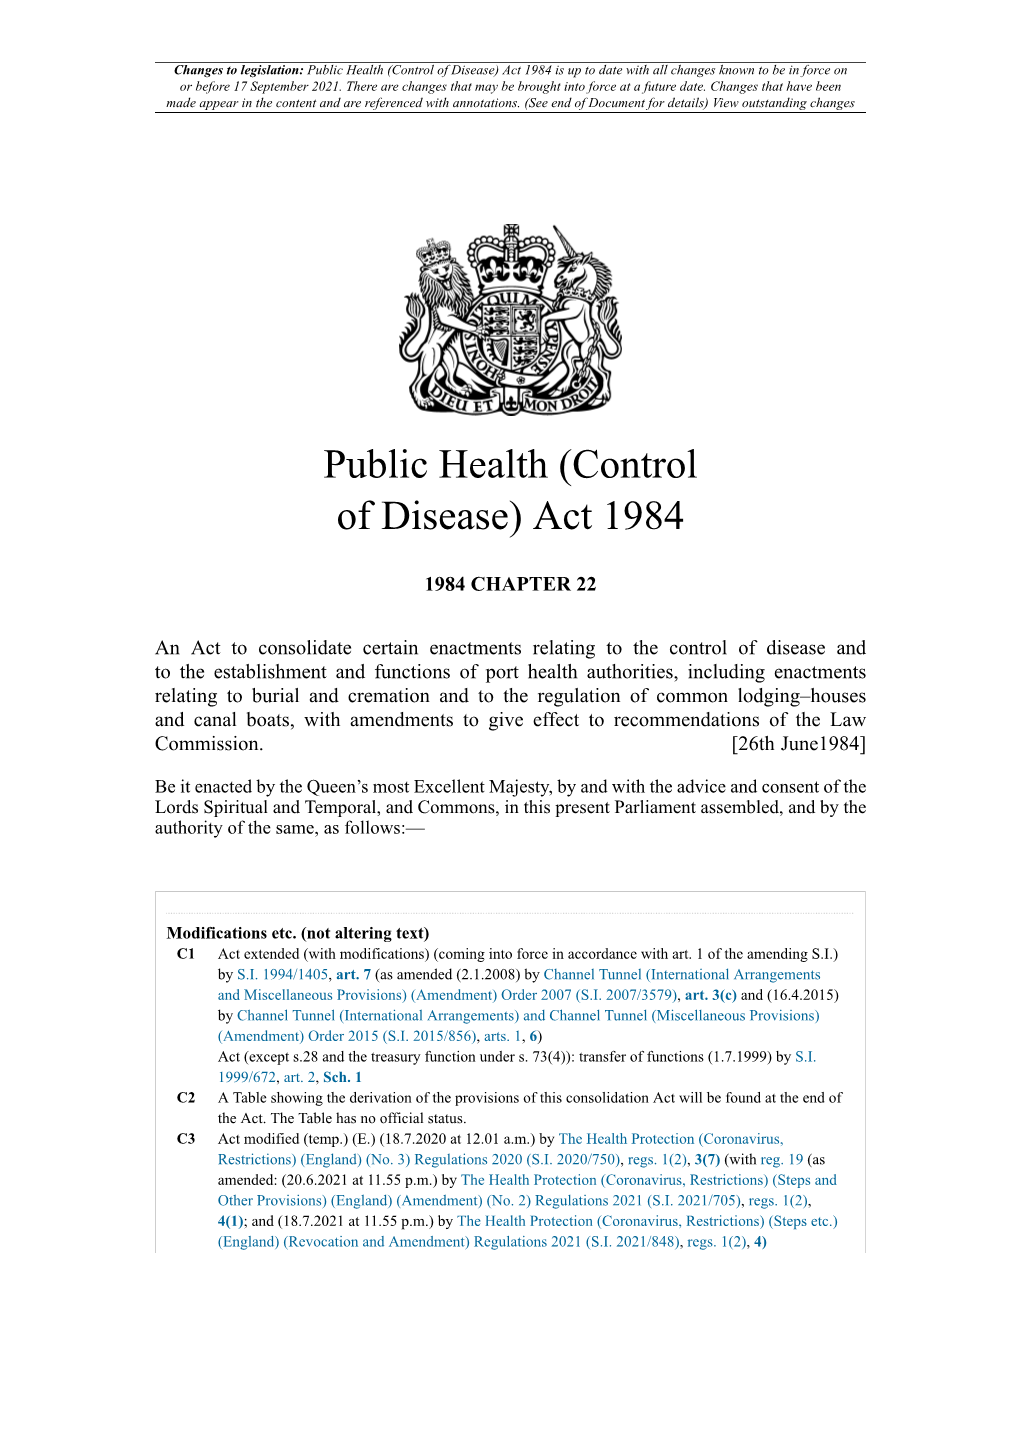 Act 1984 Is up to Date with All Changes Known to Be in Force on Or Before 17 September 2021